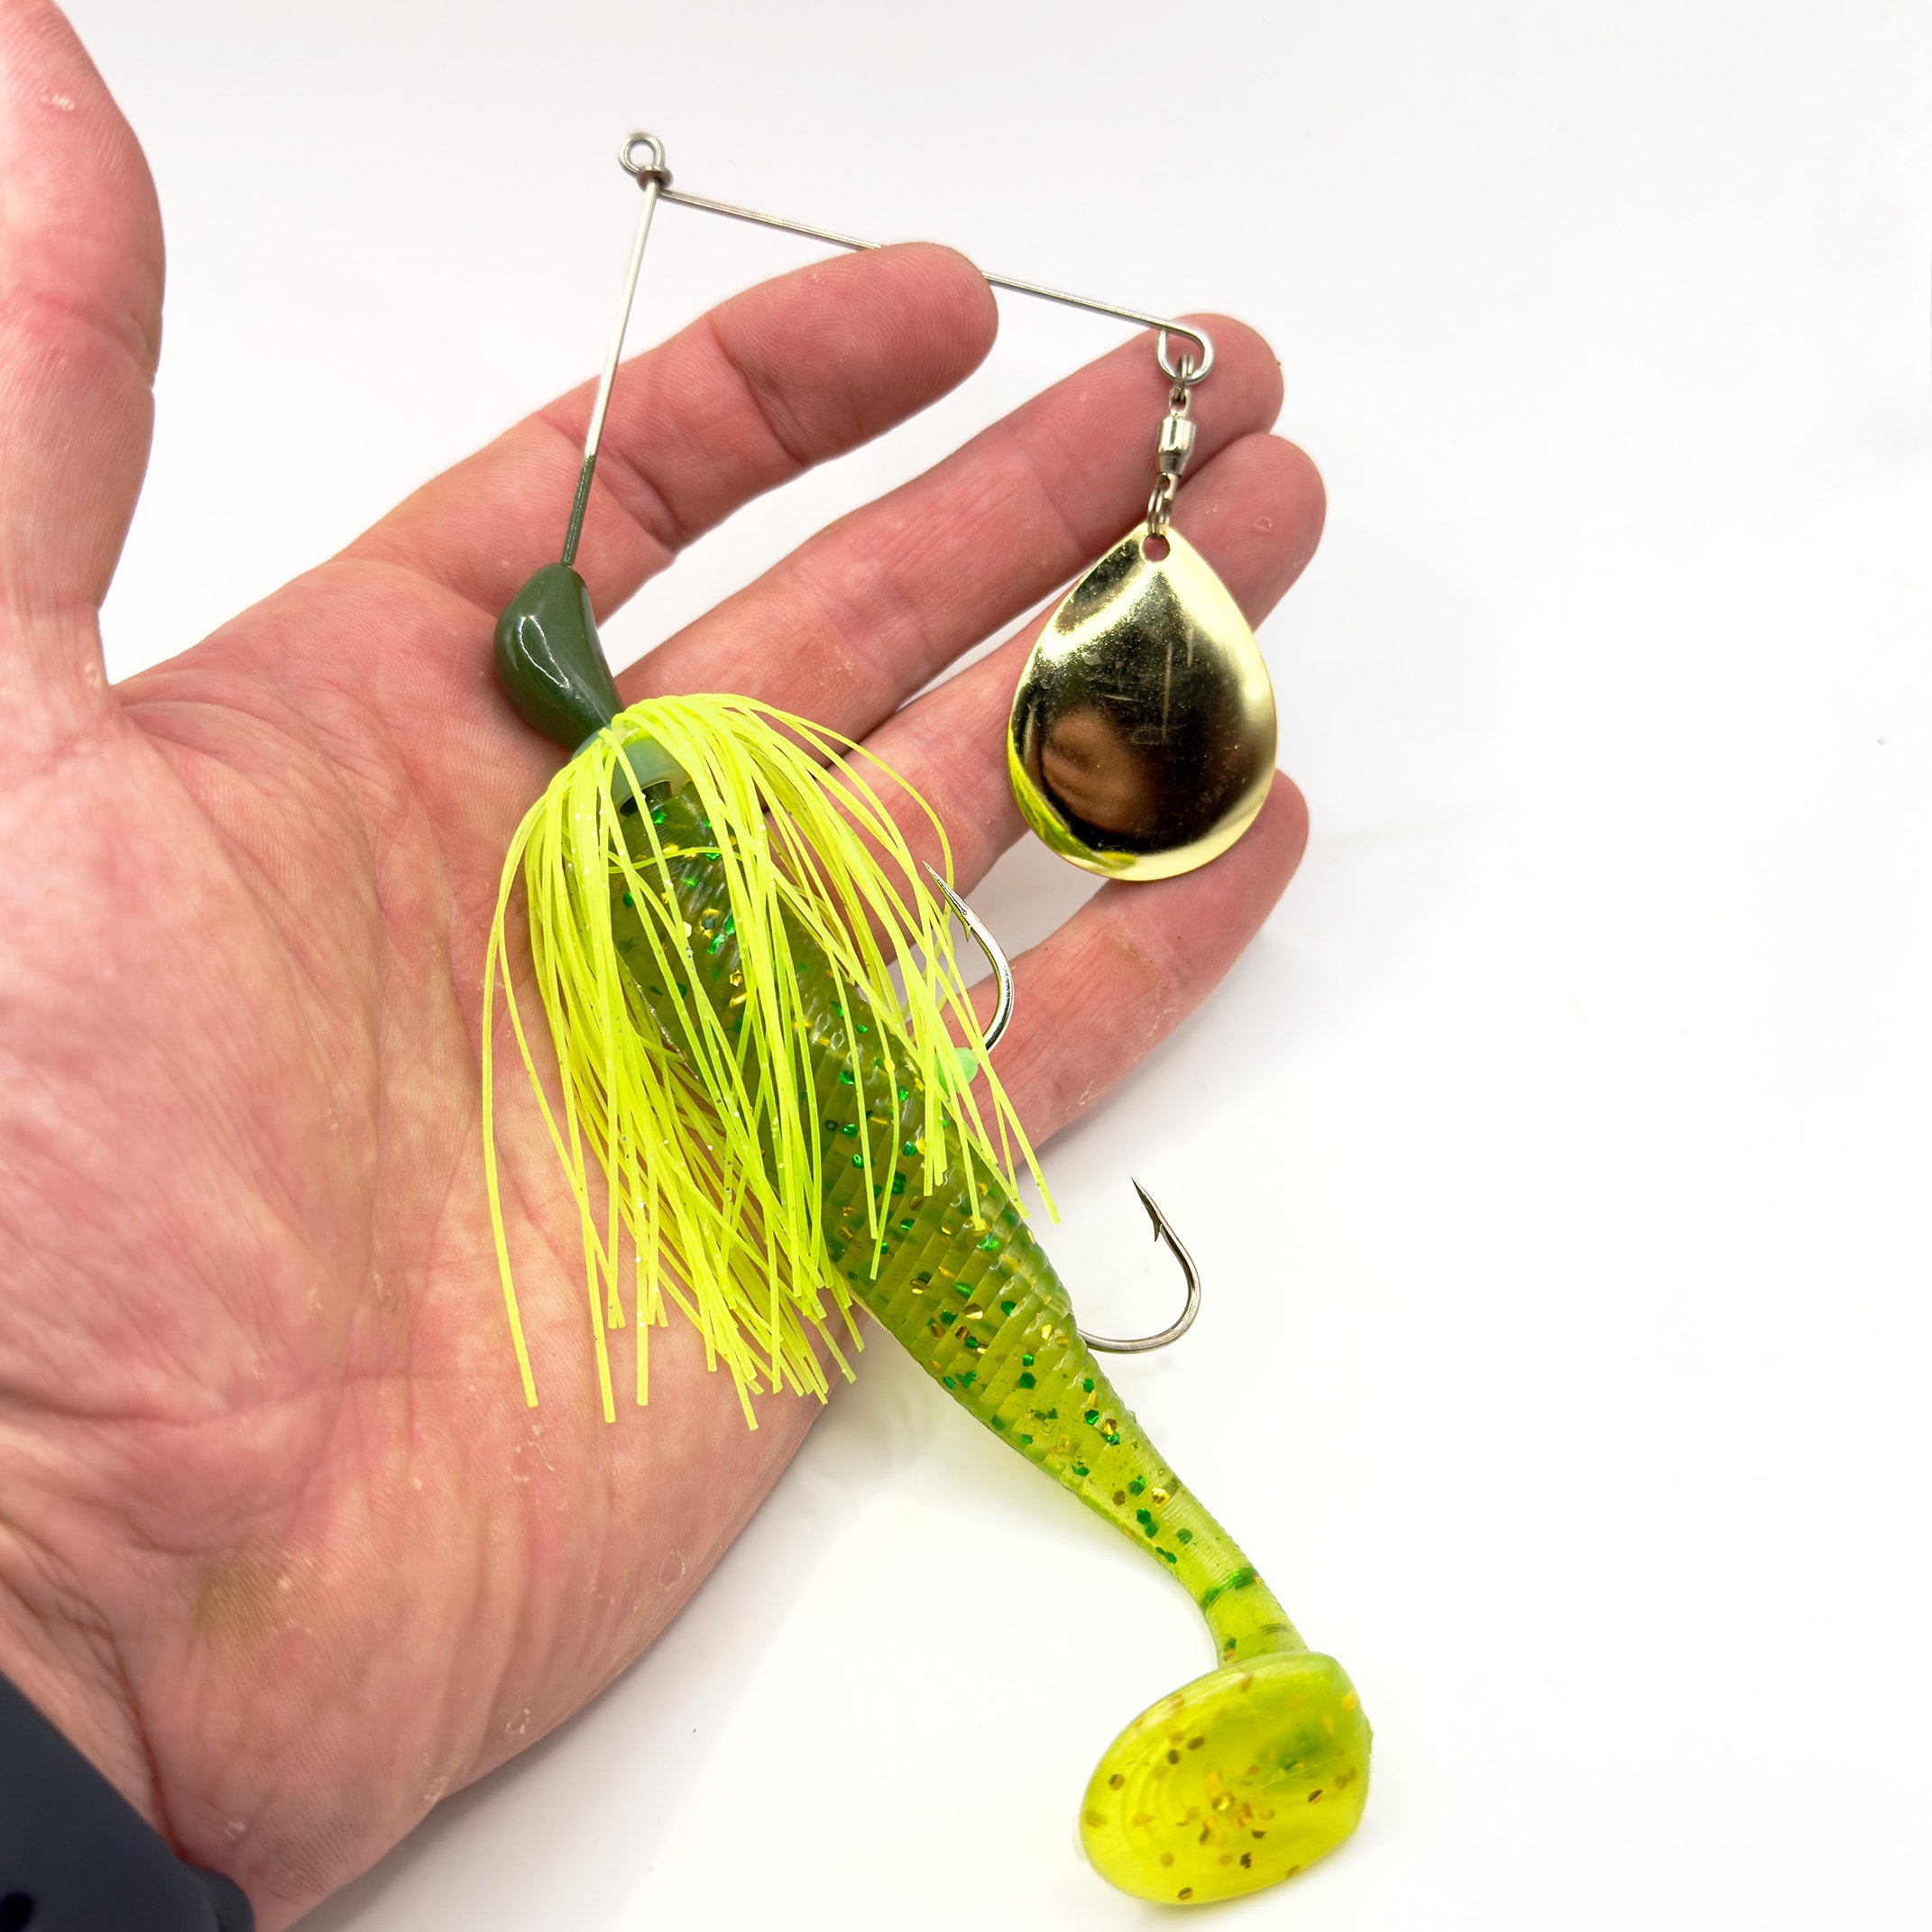 HC Lures - High-Quality Fishing Lures for Australian Species